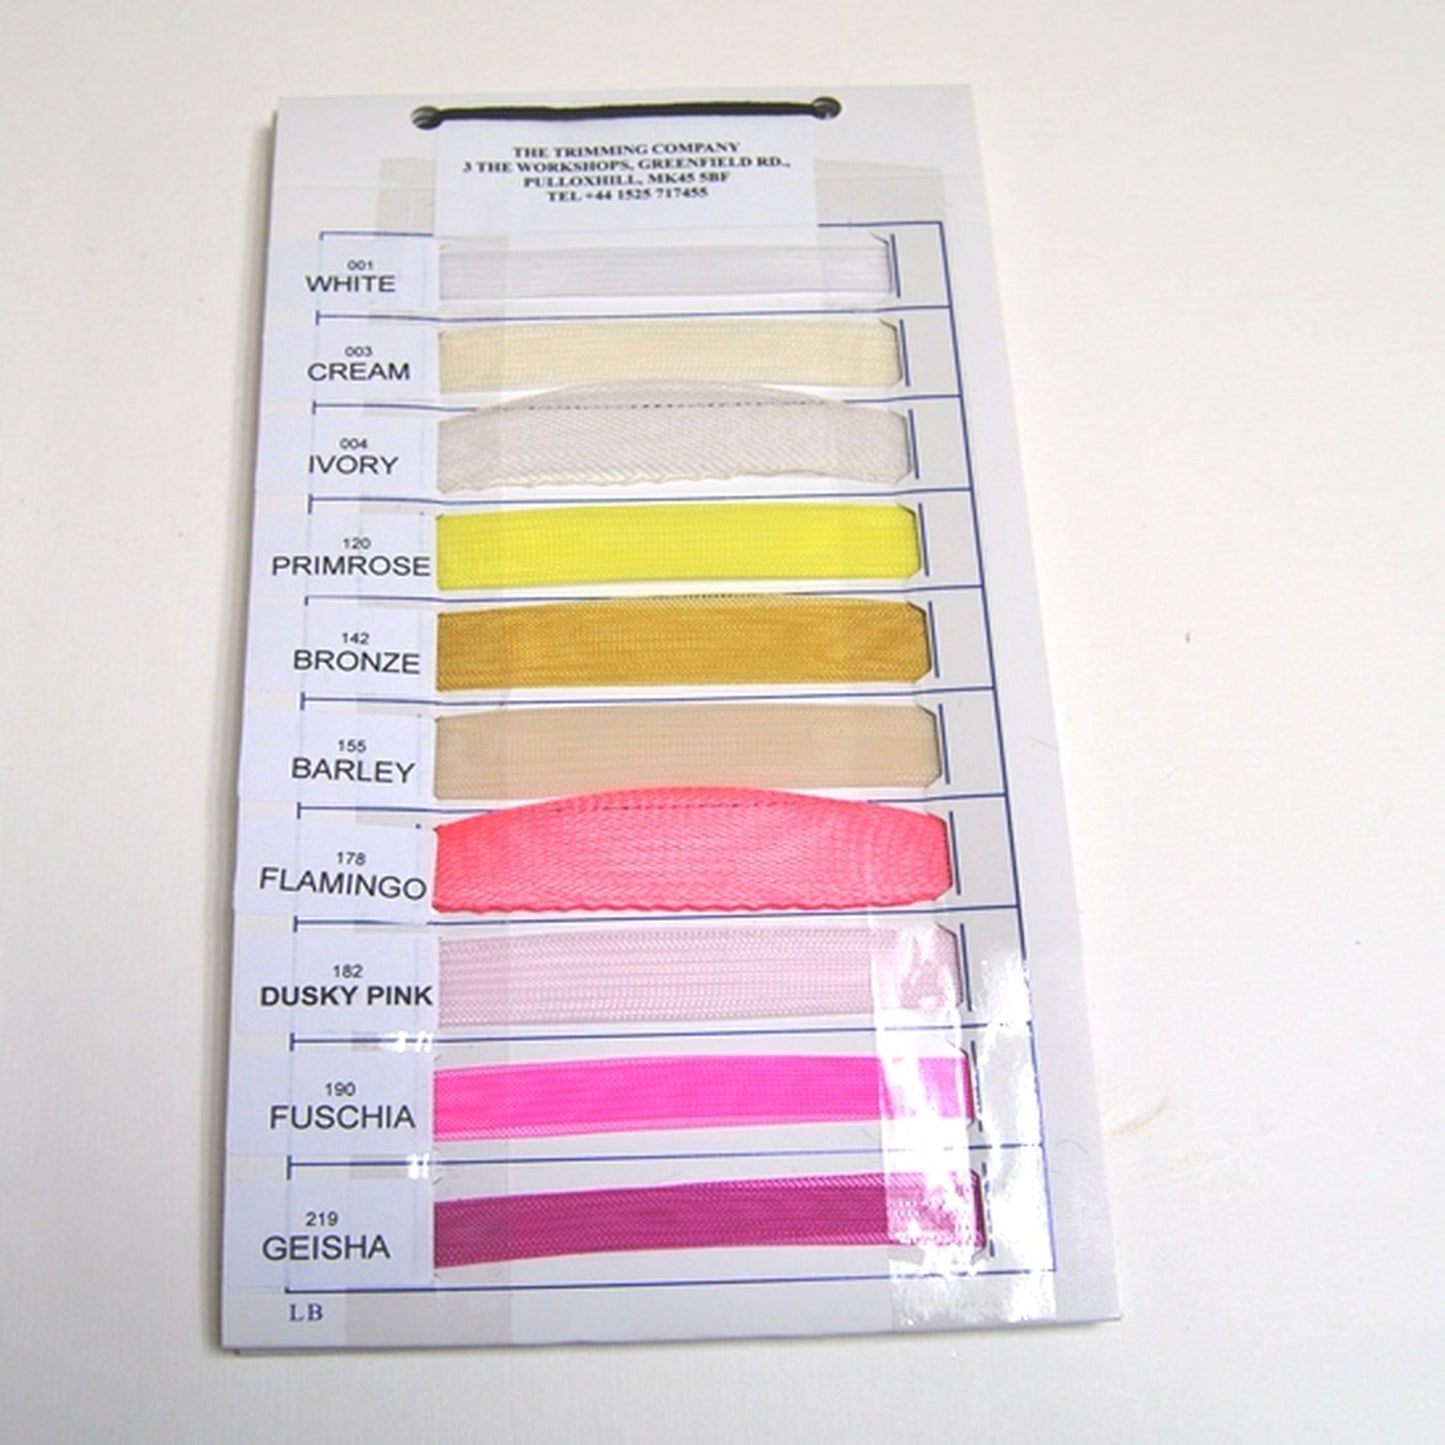 Crinoline swatch book showing all colours available of our crin SC002